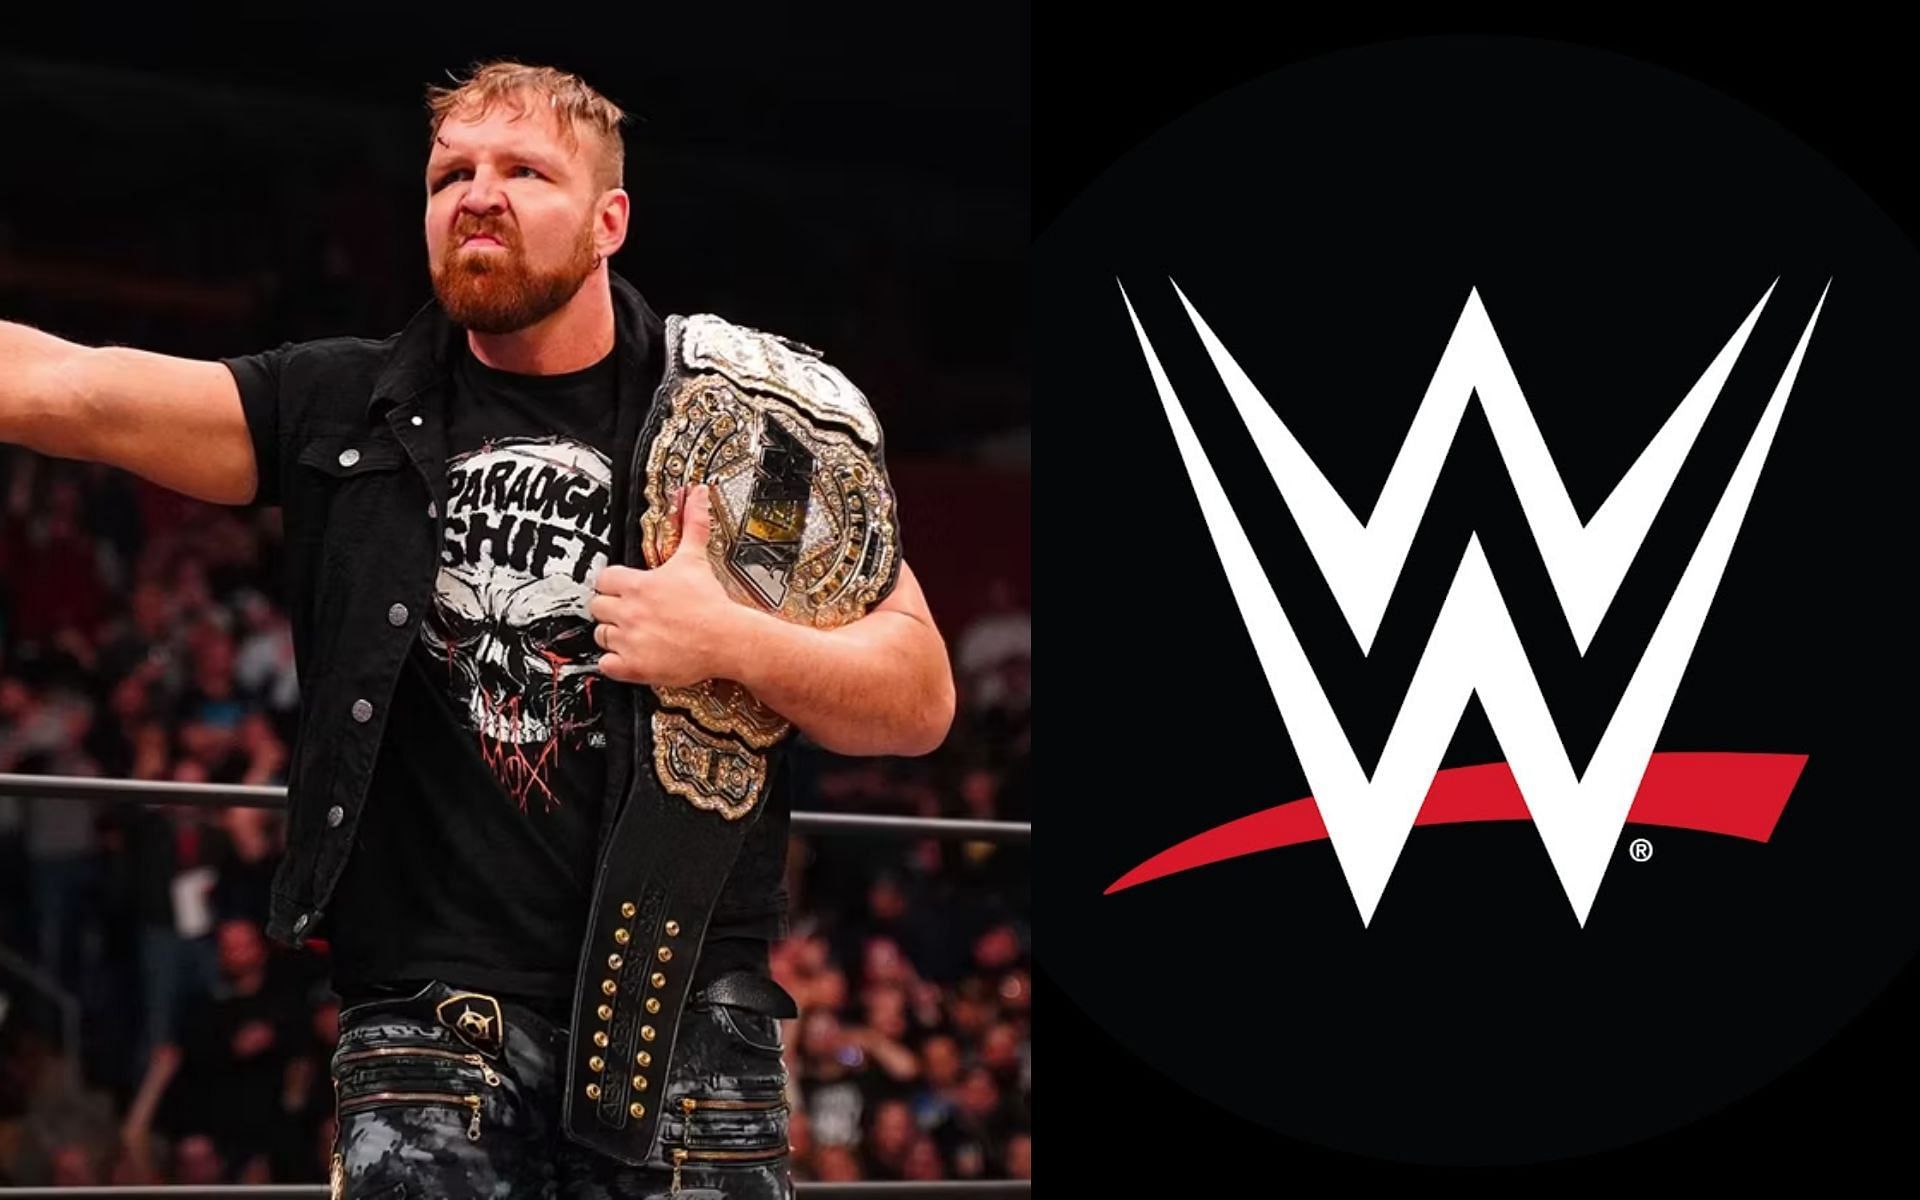 Jon Moxley (left) and WWE logo (right).